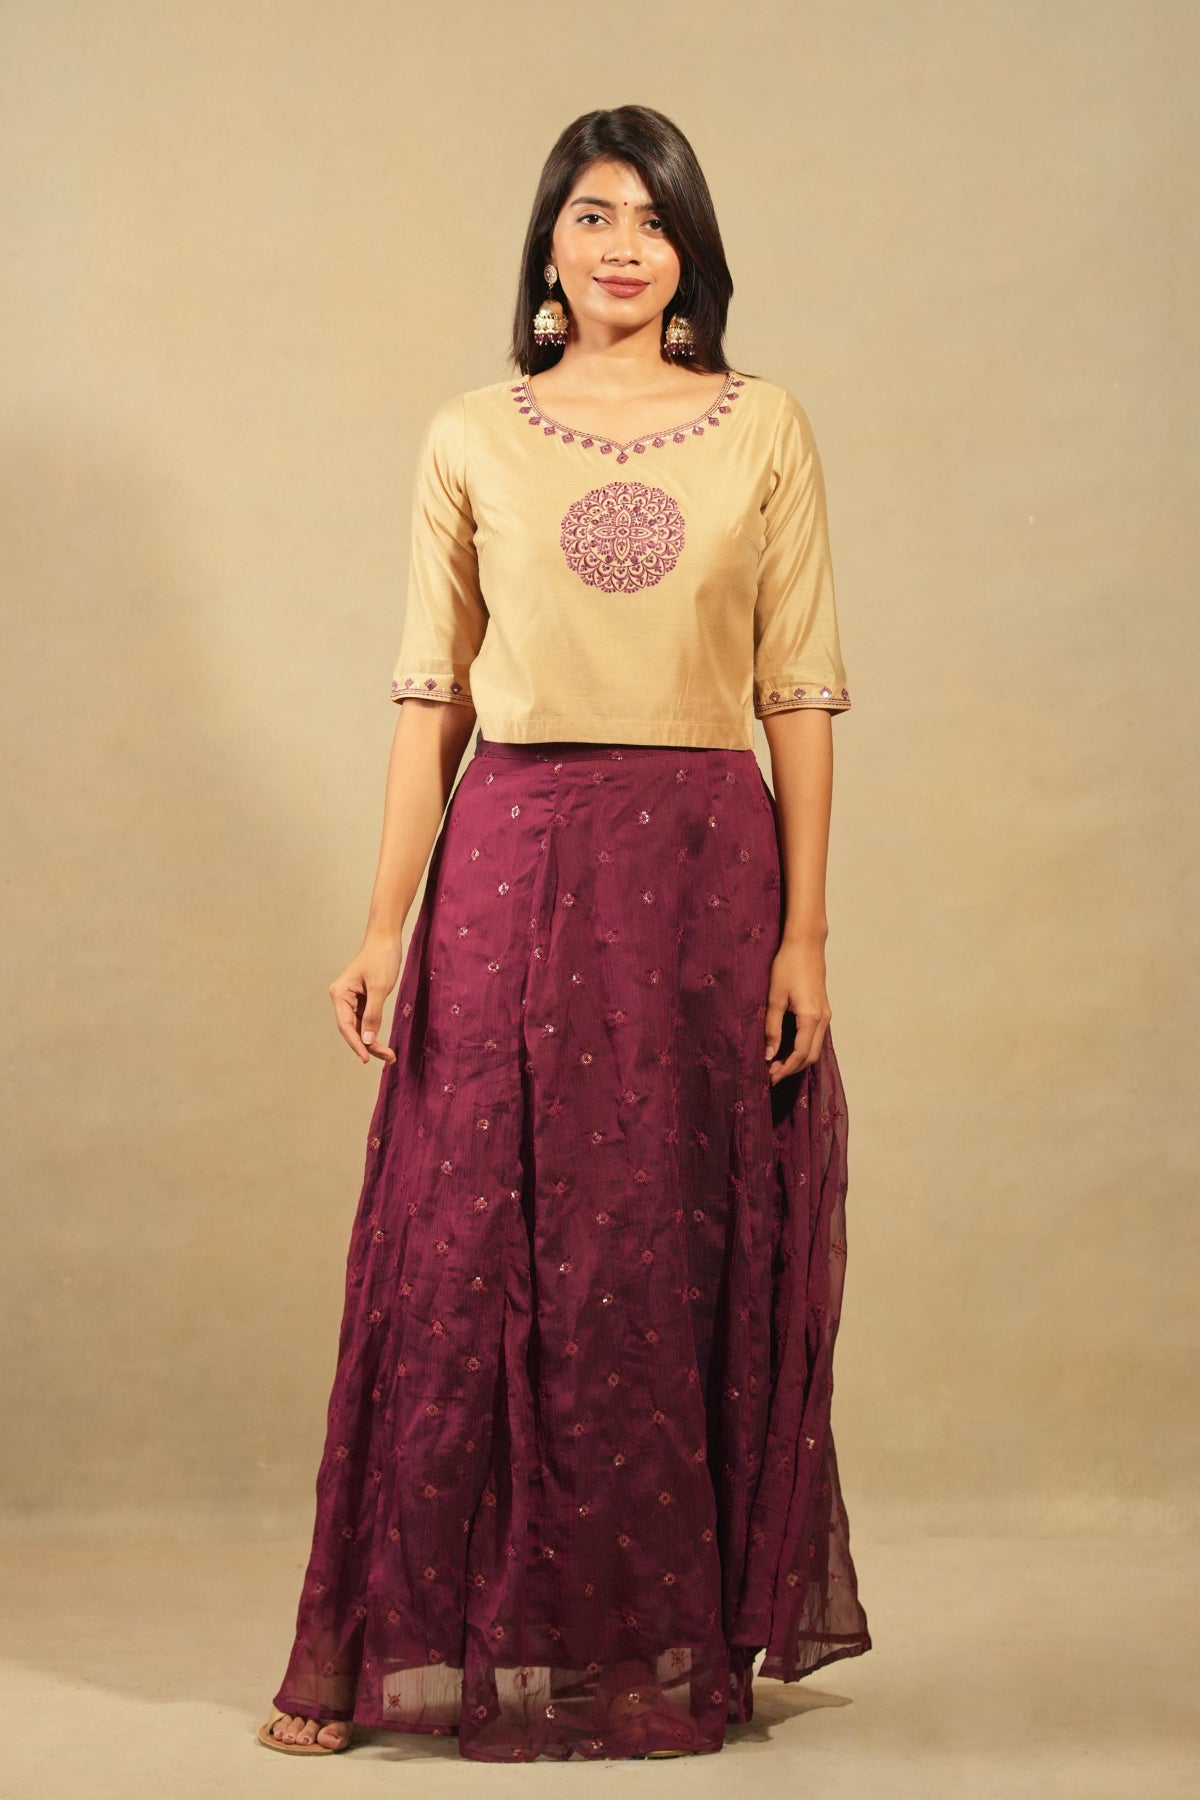 Mandala Placement Top With All Over Sequins Skirt Set Beige Burgundy